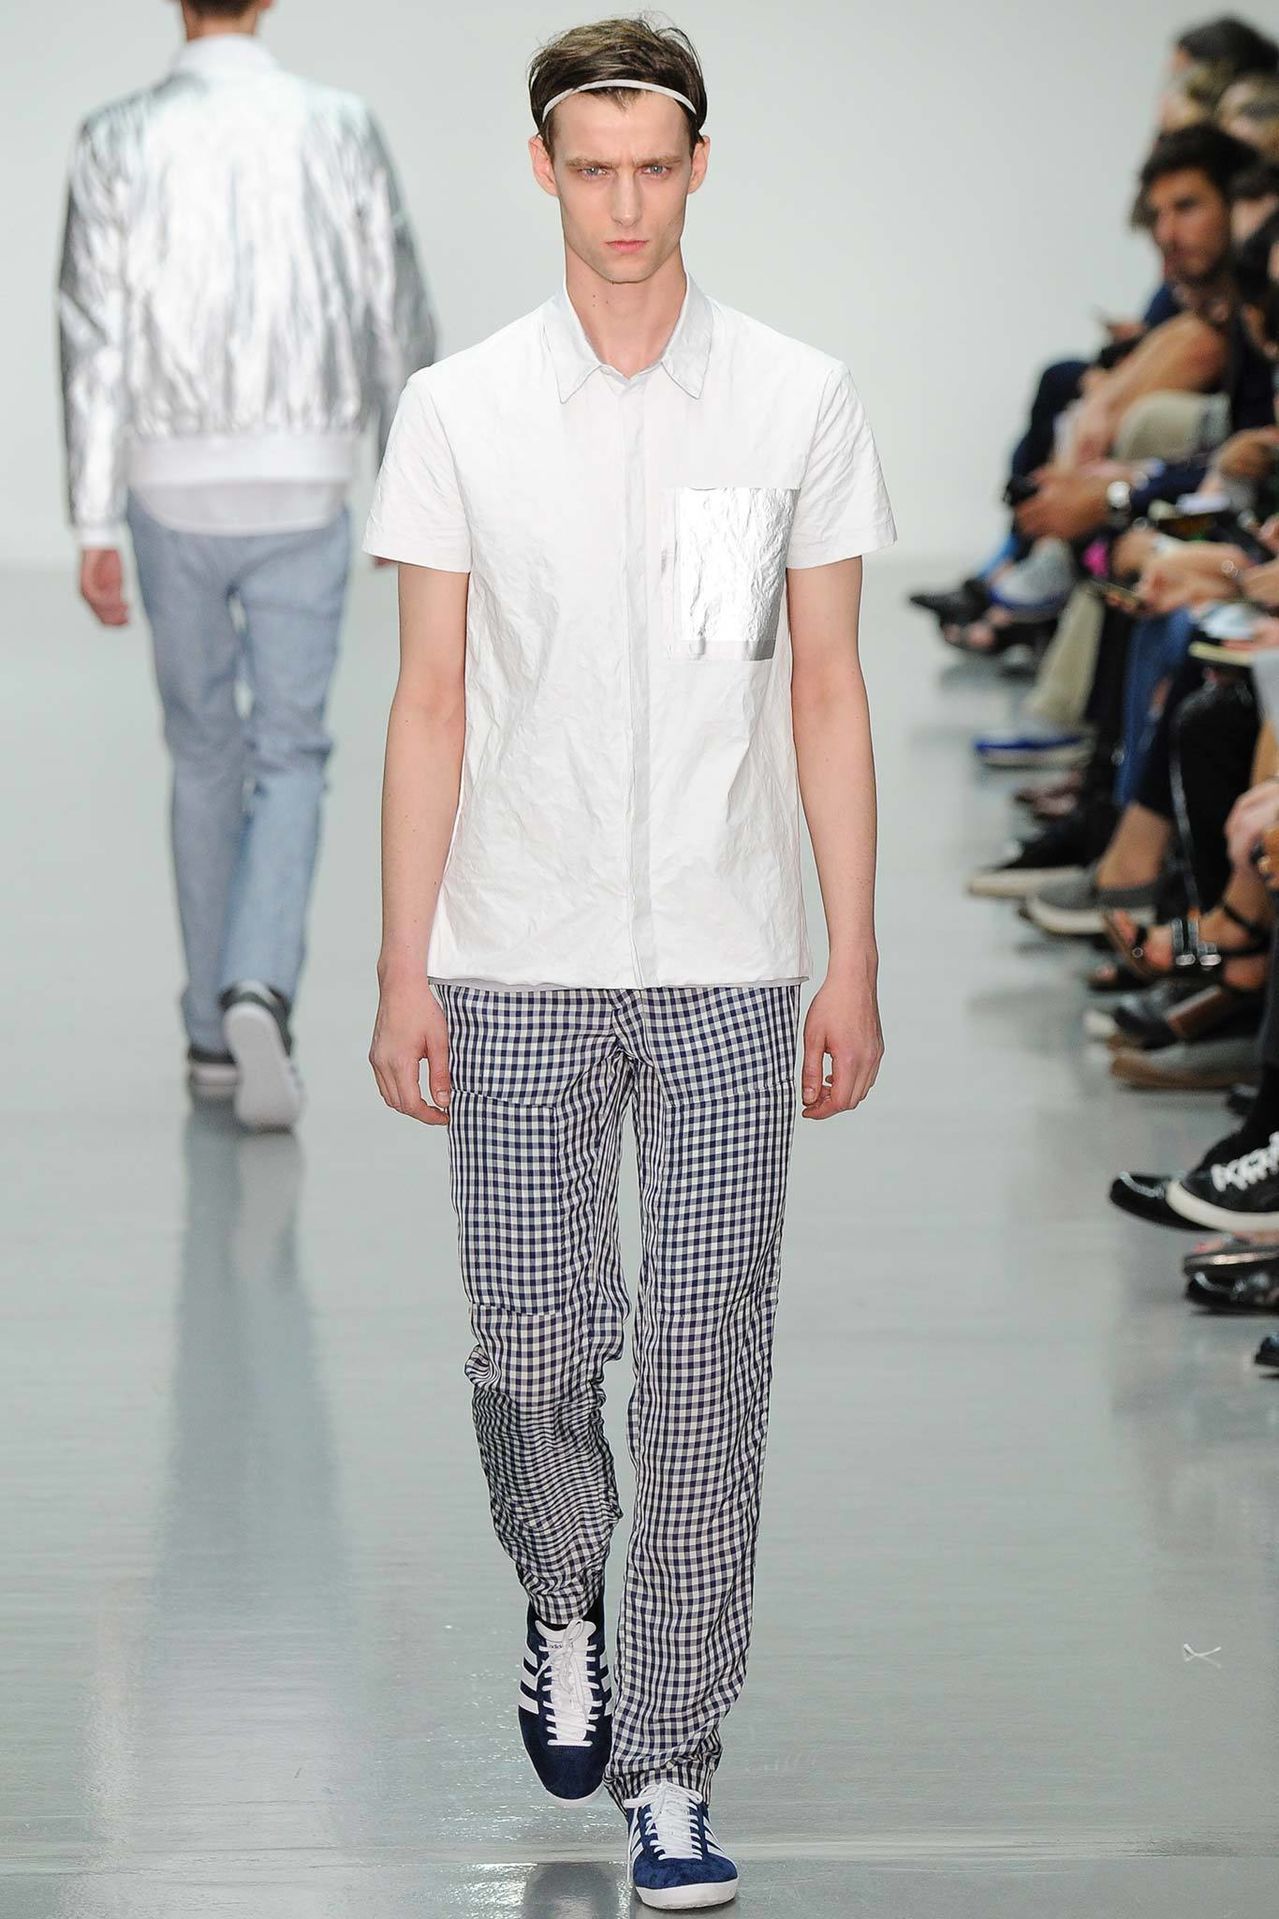 Richard Nicoll Spring/Summer 2015 | London Collections: Men – The ...